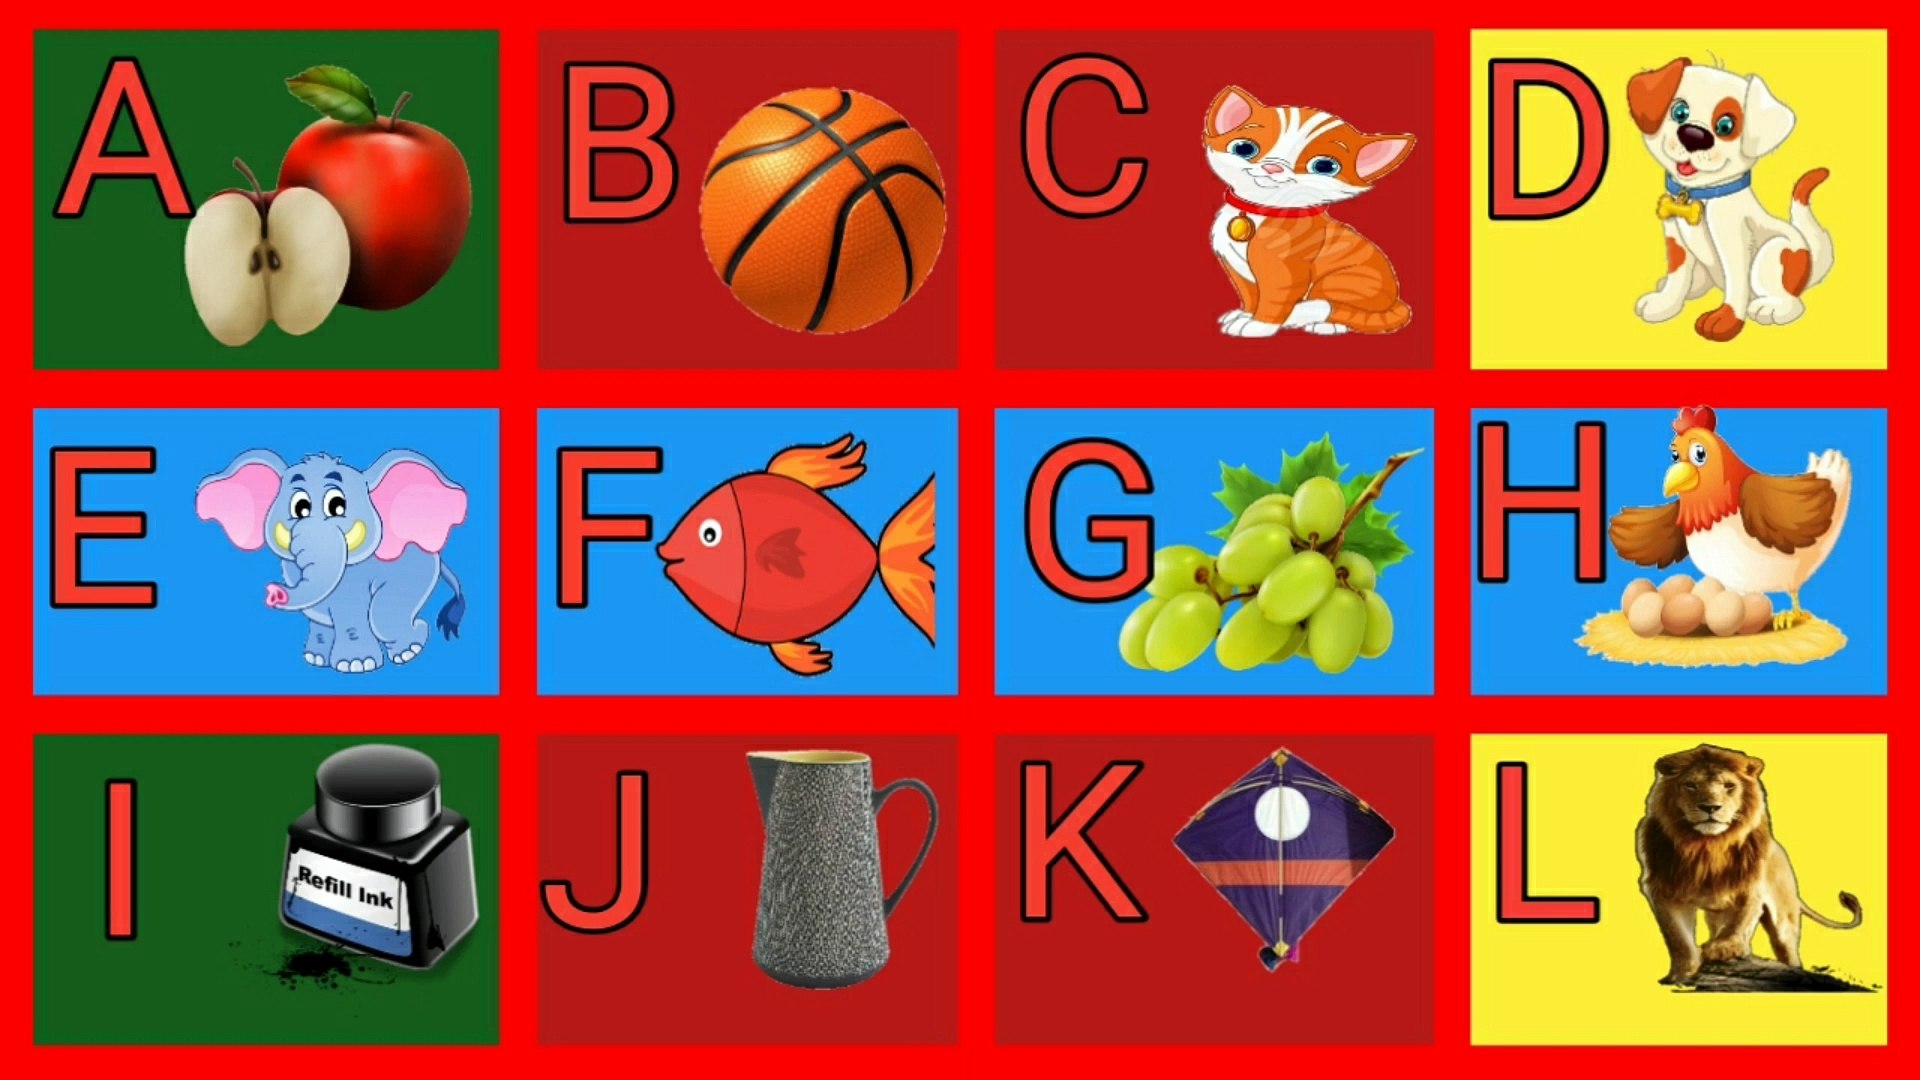 a for apple b for ball c for cat d for dog, apple ball cat dog elephant  fish gorilla hat, a for apple b for badka apple, a for apple b for